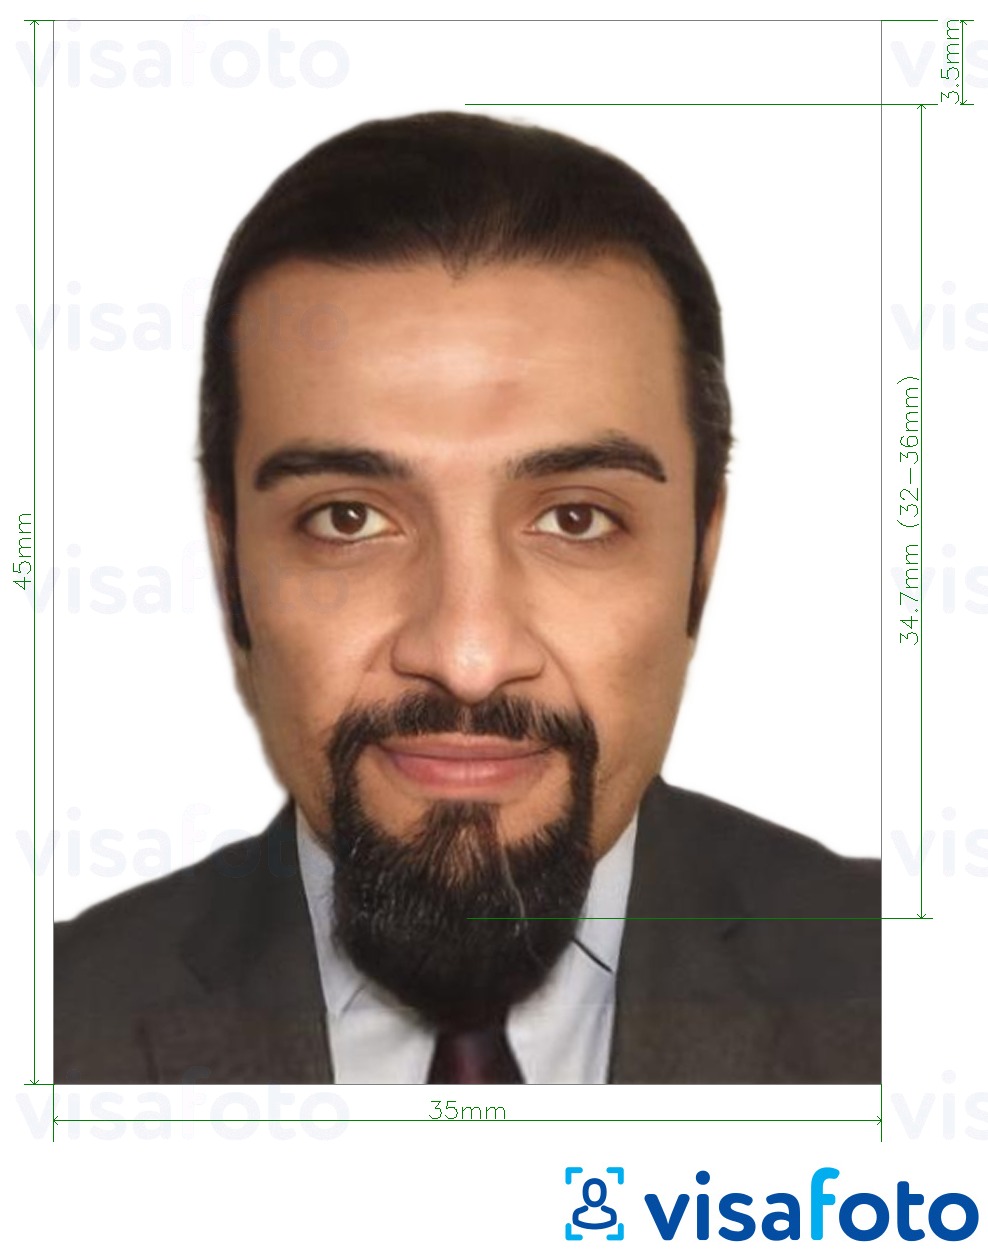 Example of photo for Algeria ID card 35x45 mm (3.5x4.5 cm) with exact size specification